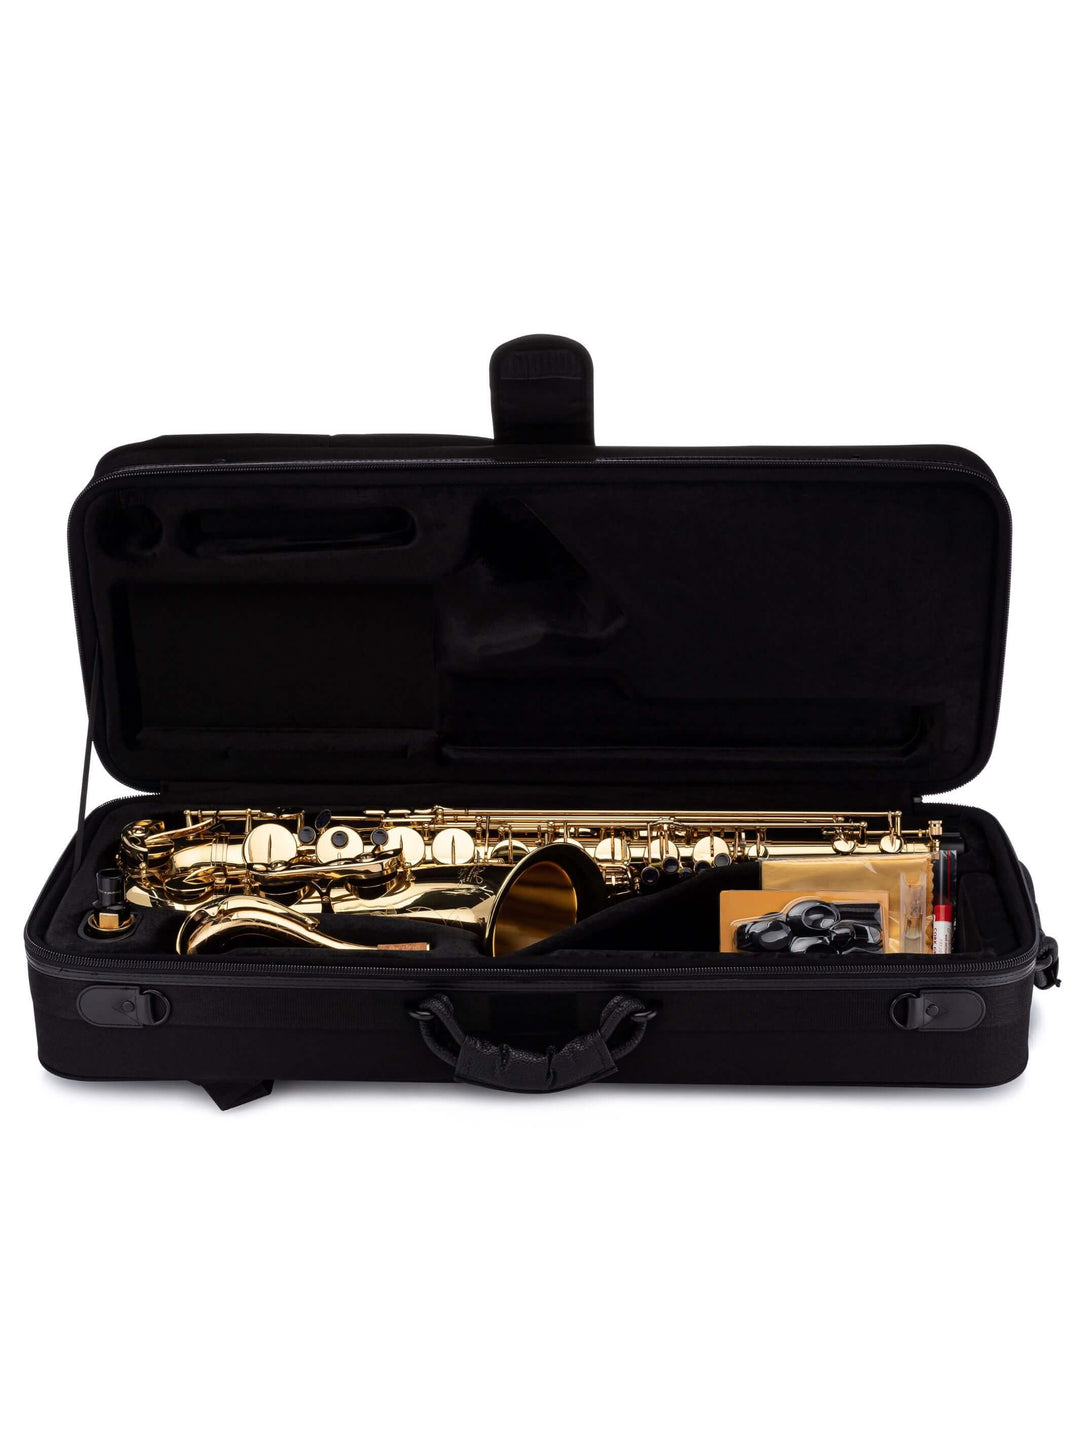 TS-860U Tenor Saxophone Unlacquered inside Carrying Case#finish_unlacquered